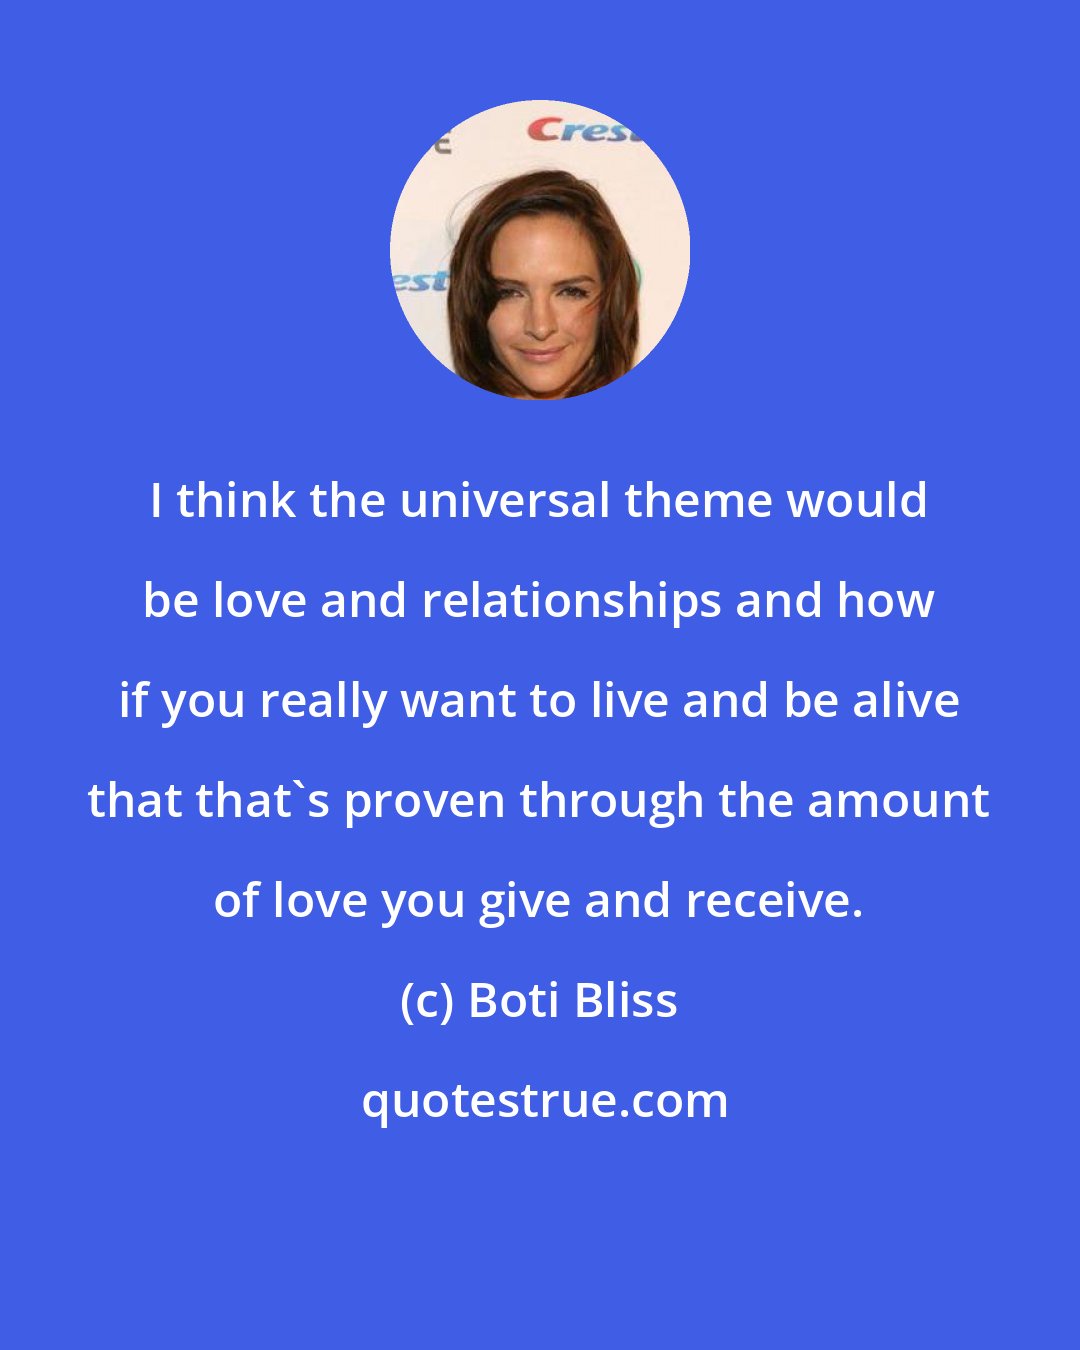 Boti Bliss: I think the universal theme would be love and relationships and how if you really want to live and be alive that that's proven through the amount of love you give and receive.